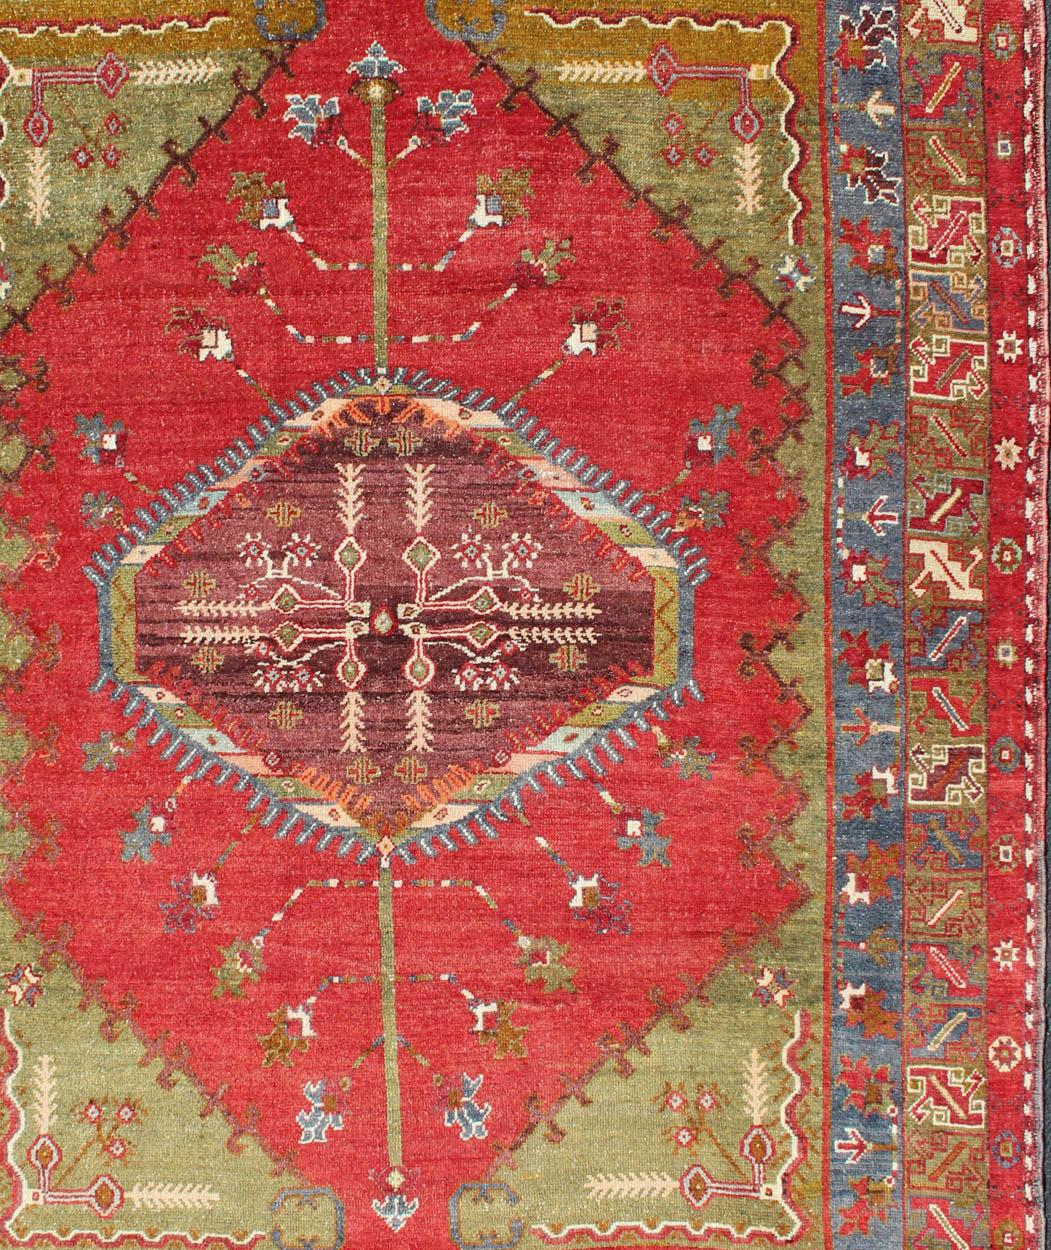 Antique Turkish Medallion Oushak Rug in Red, Green and Blue In Excellent Condition For Sale In Atlanta, GA